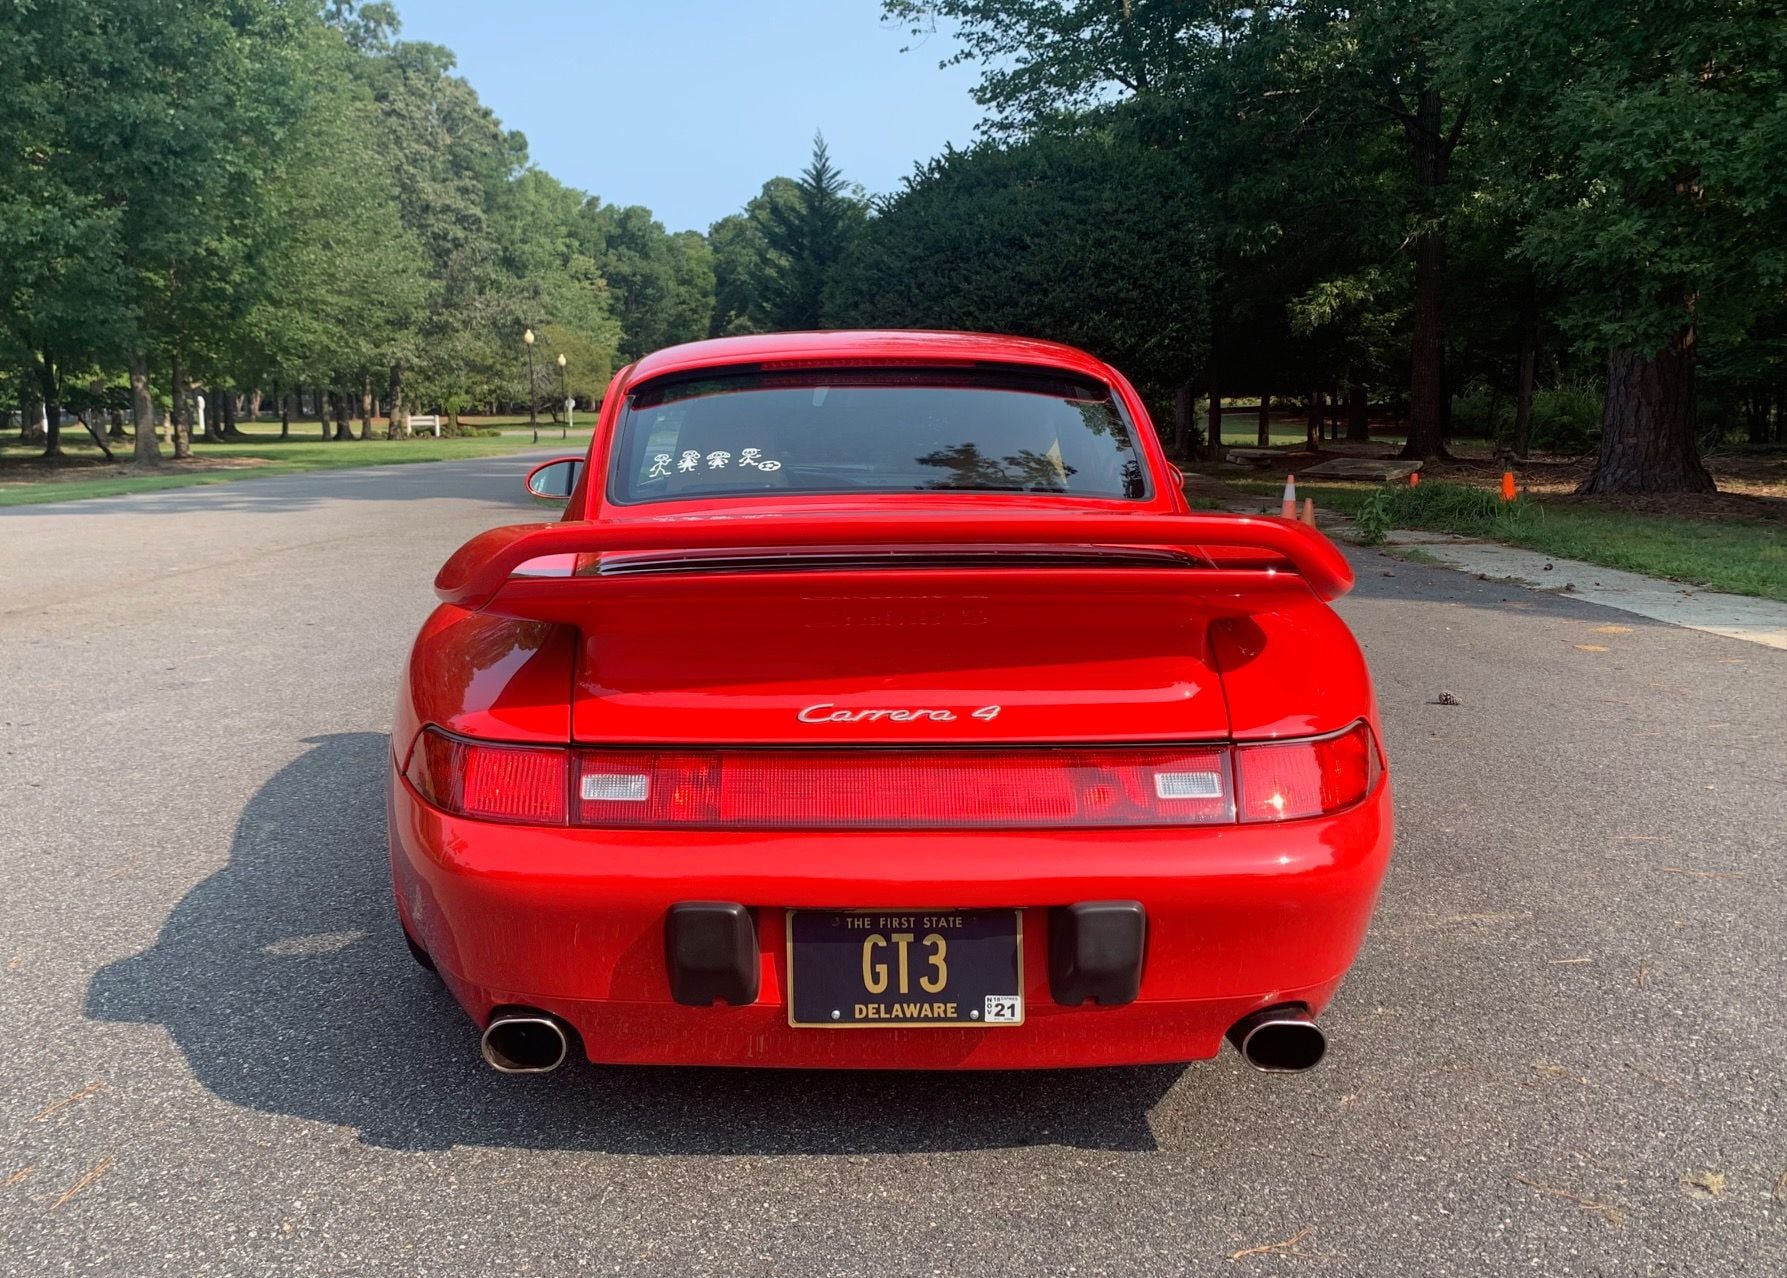 1995 Porsche 911 - 1995 Porsche 993C4 TPC Supercharger 49K miles - Used - VIN WP0AA2991SS324032 - 49,850 Miles - 6 cyl - AWD - Manual - Coupe - Red - Williamsburg, VA 23185, United States